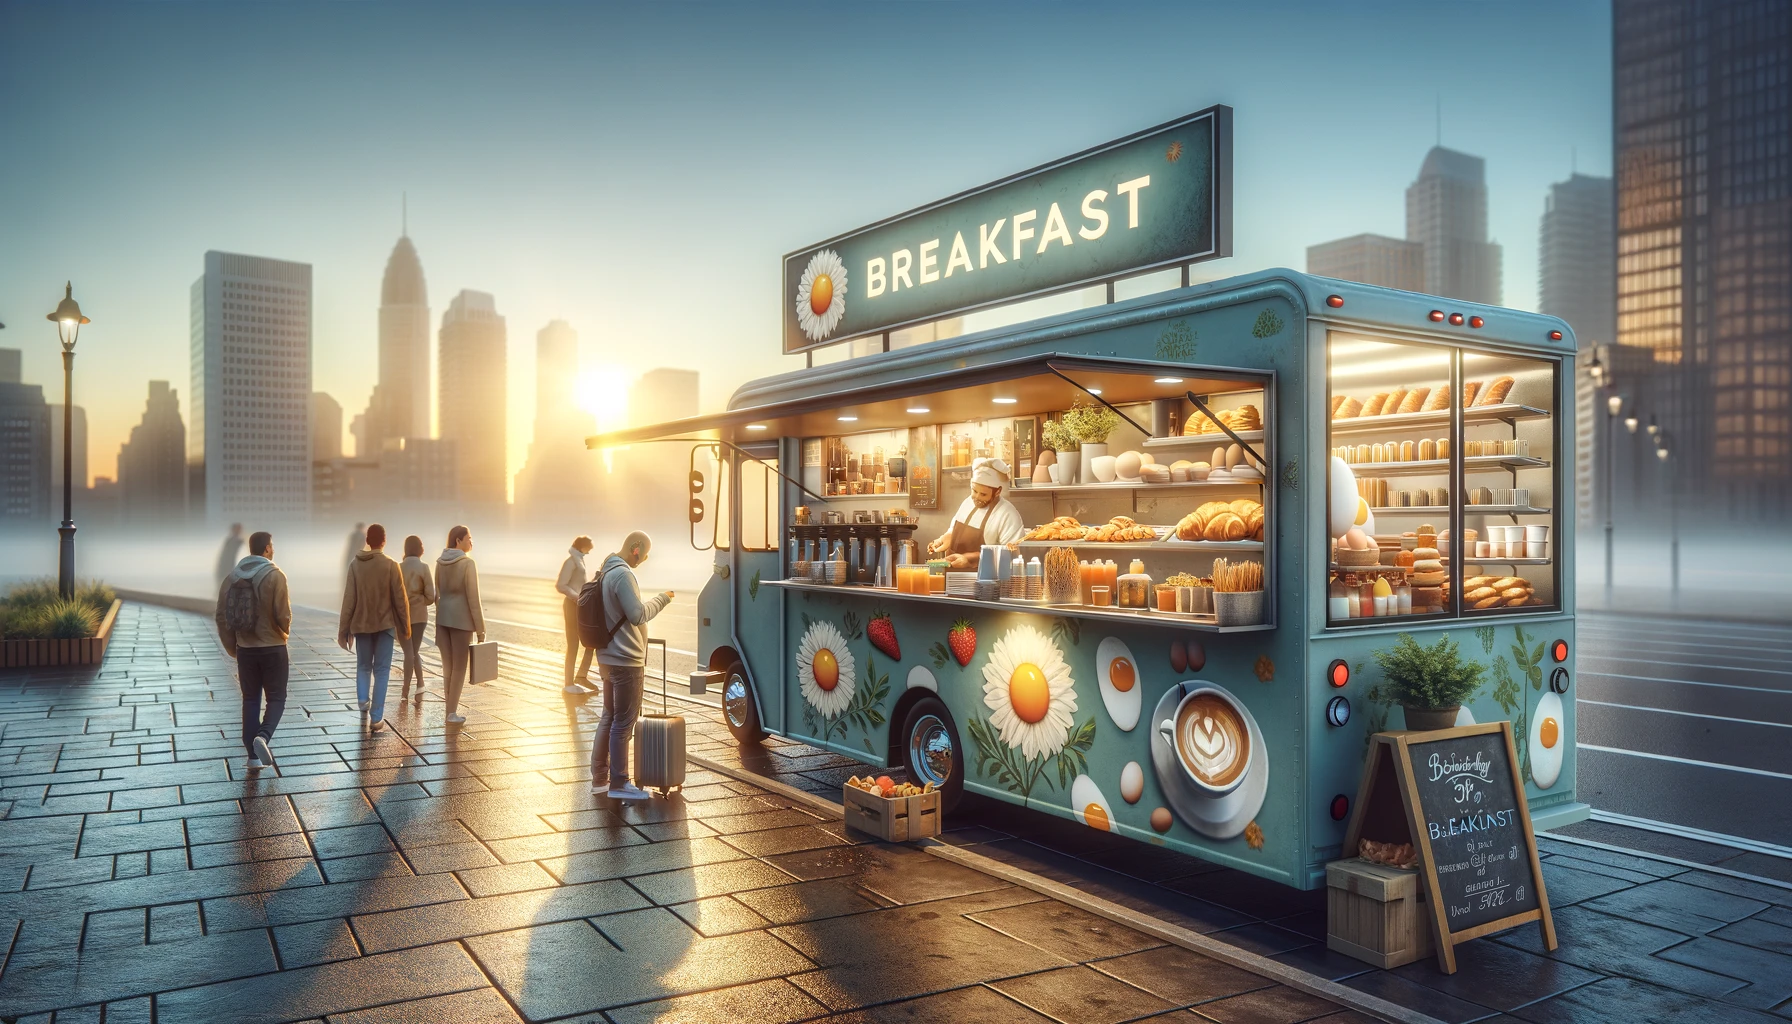 Perfect food truck for breakfast